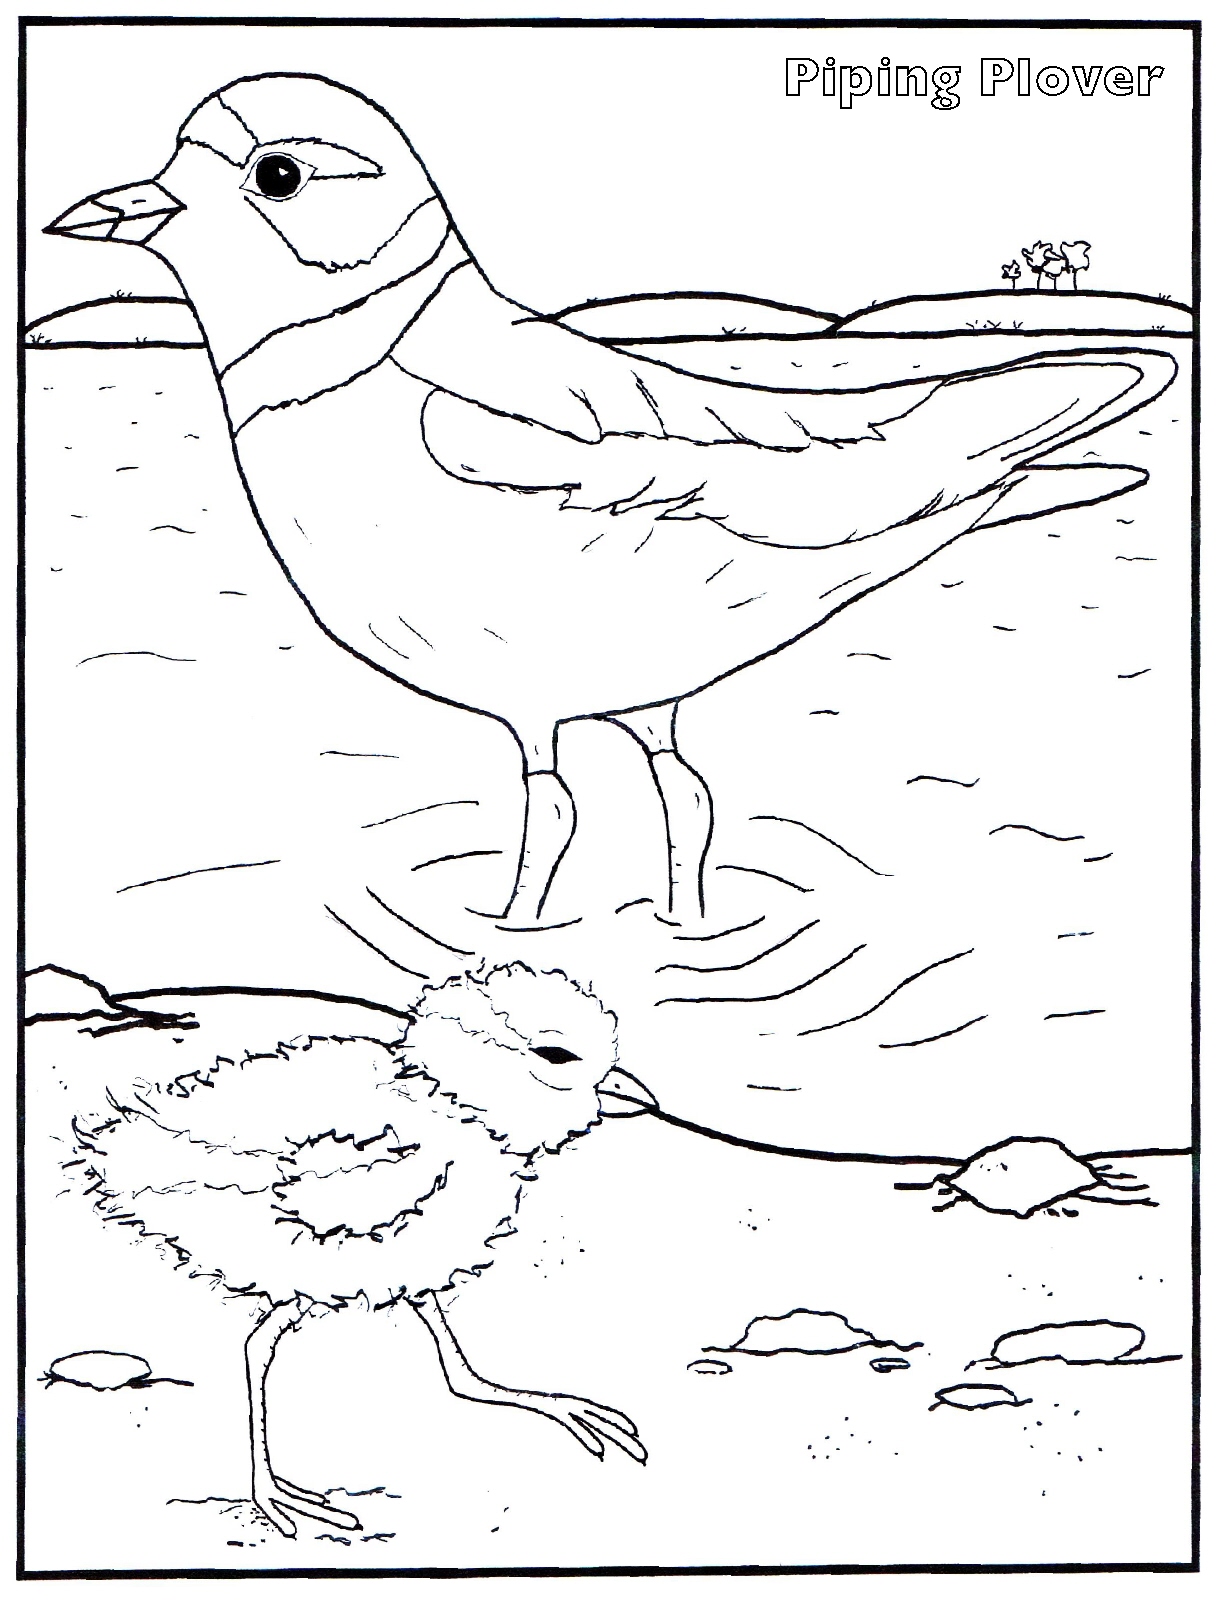 Piping Plover coloring #3, Download drawings